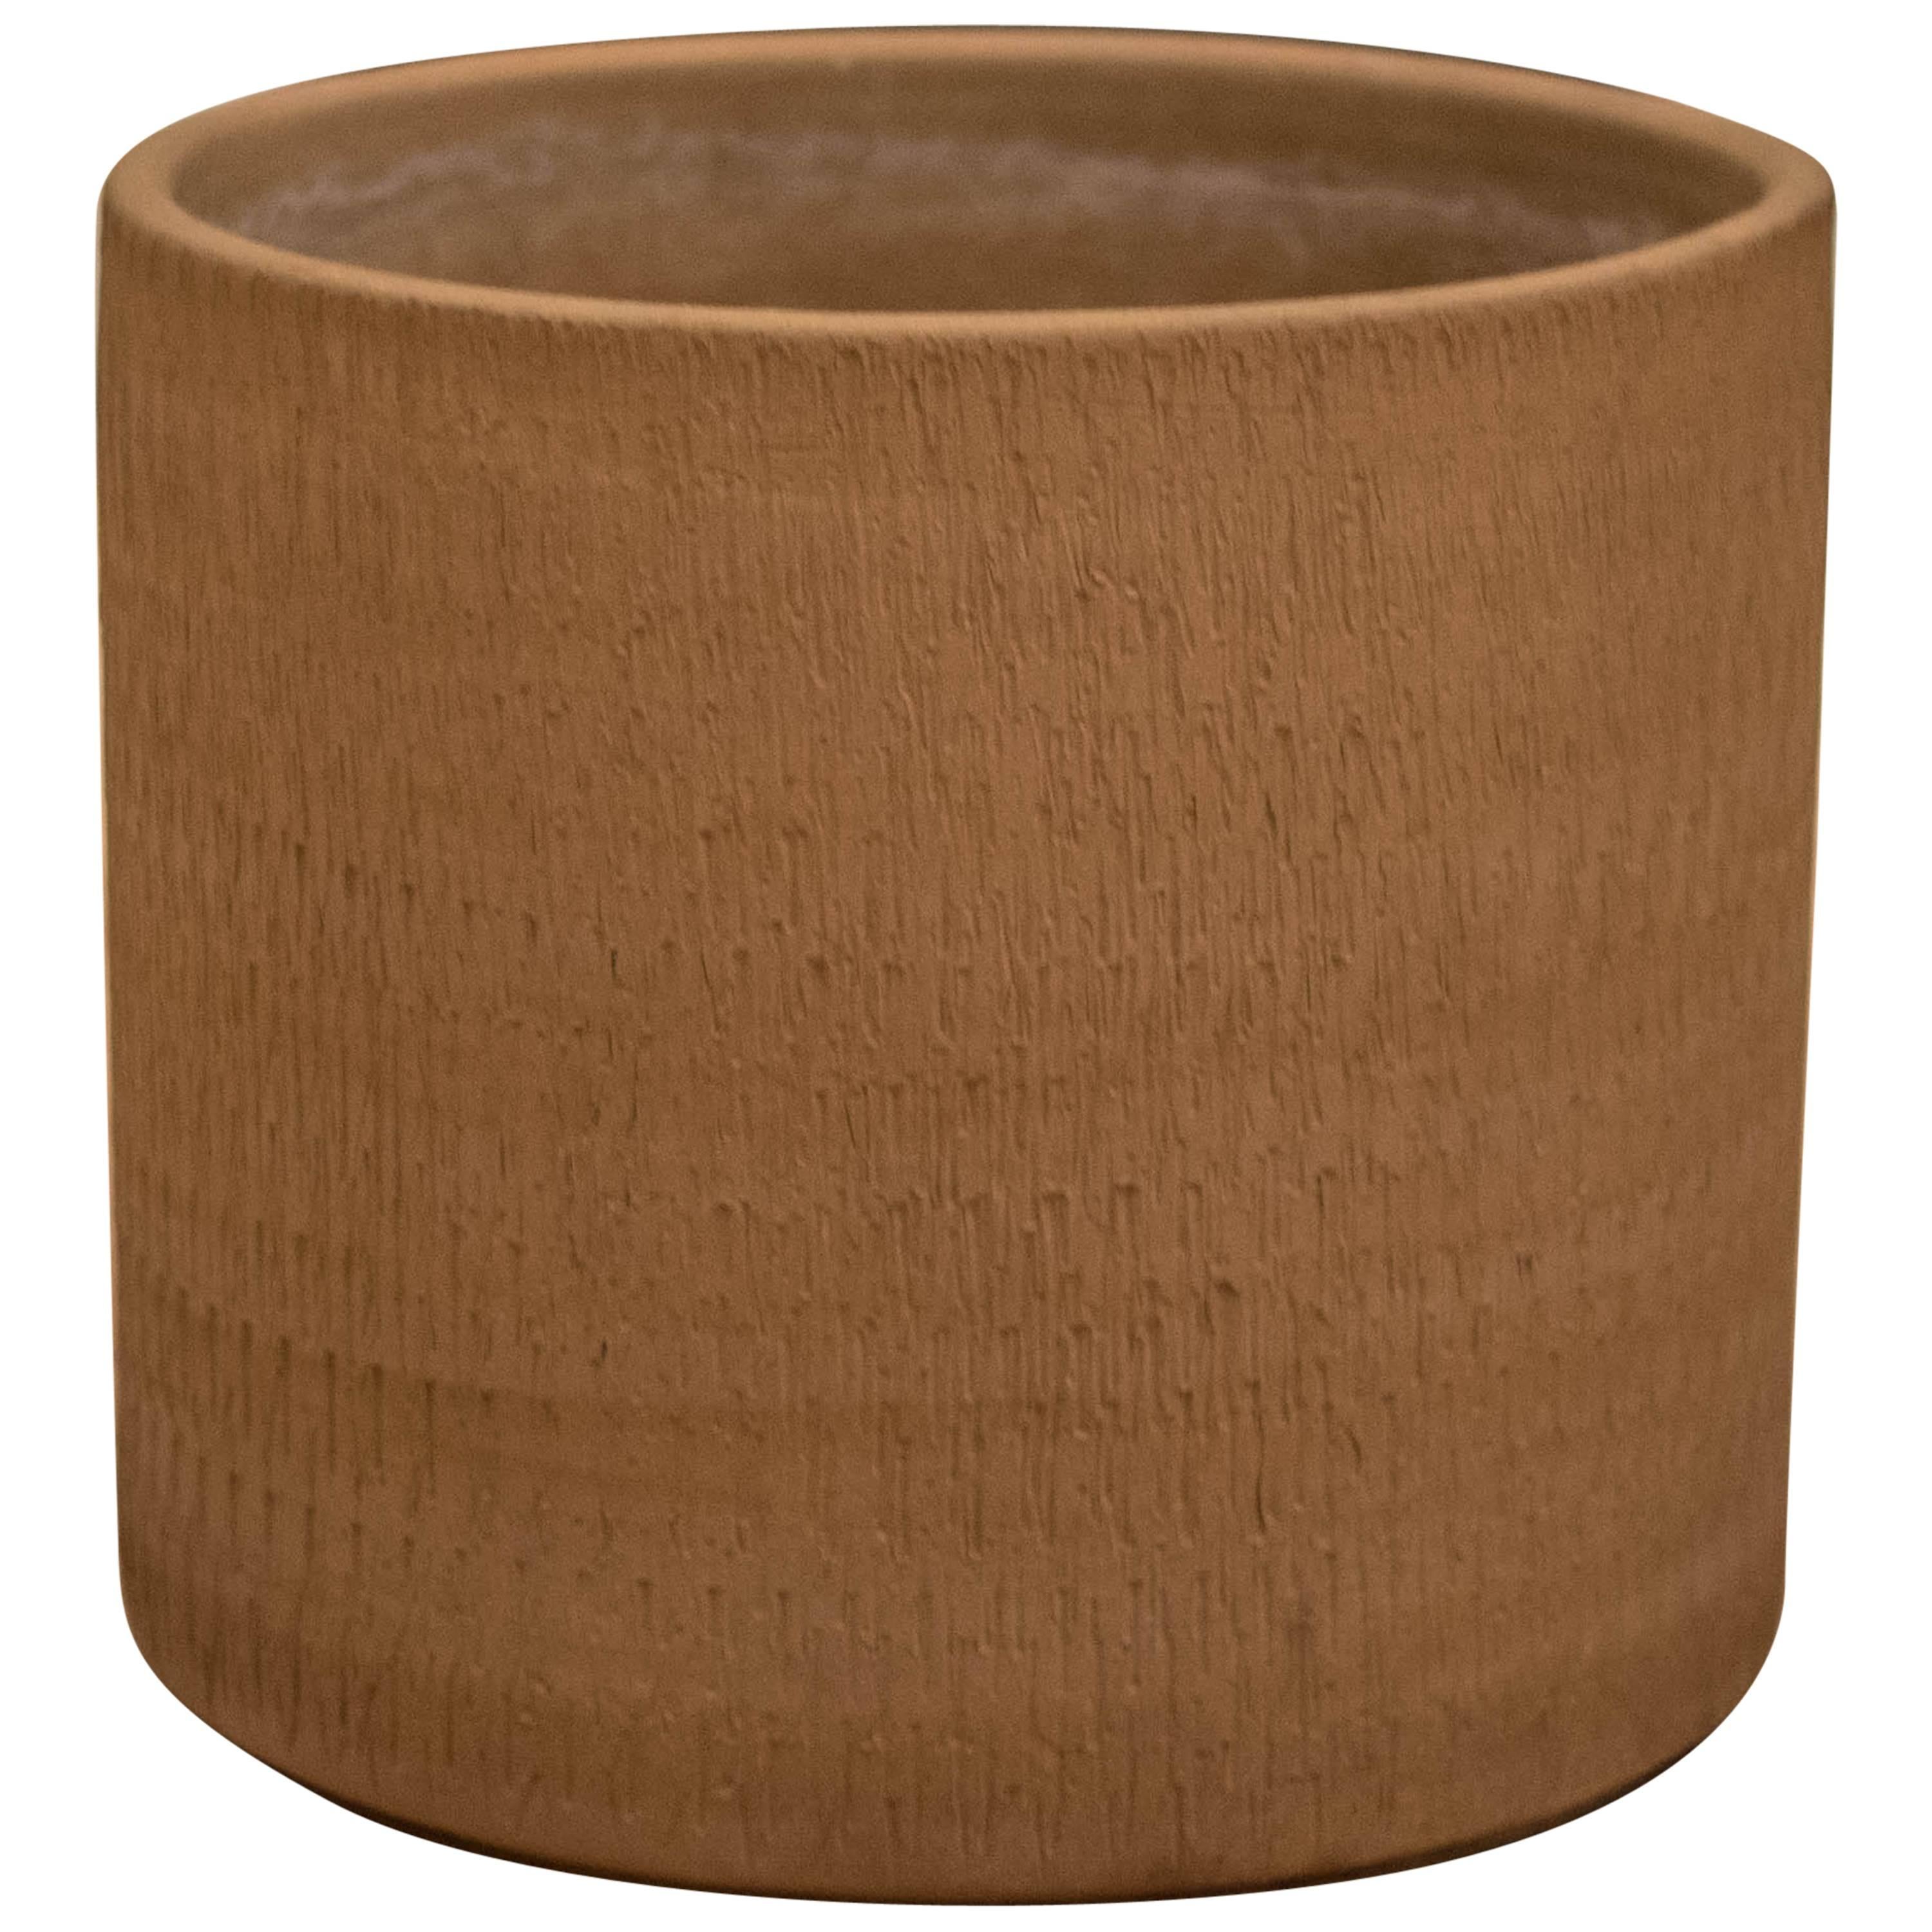 California Modern Large Sgraffito Planter Pot by Gainey